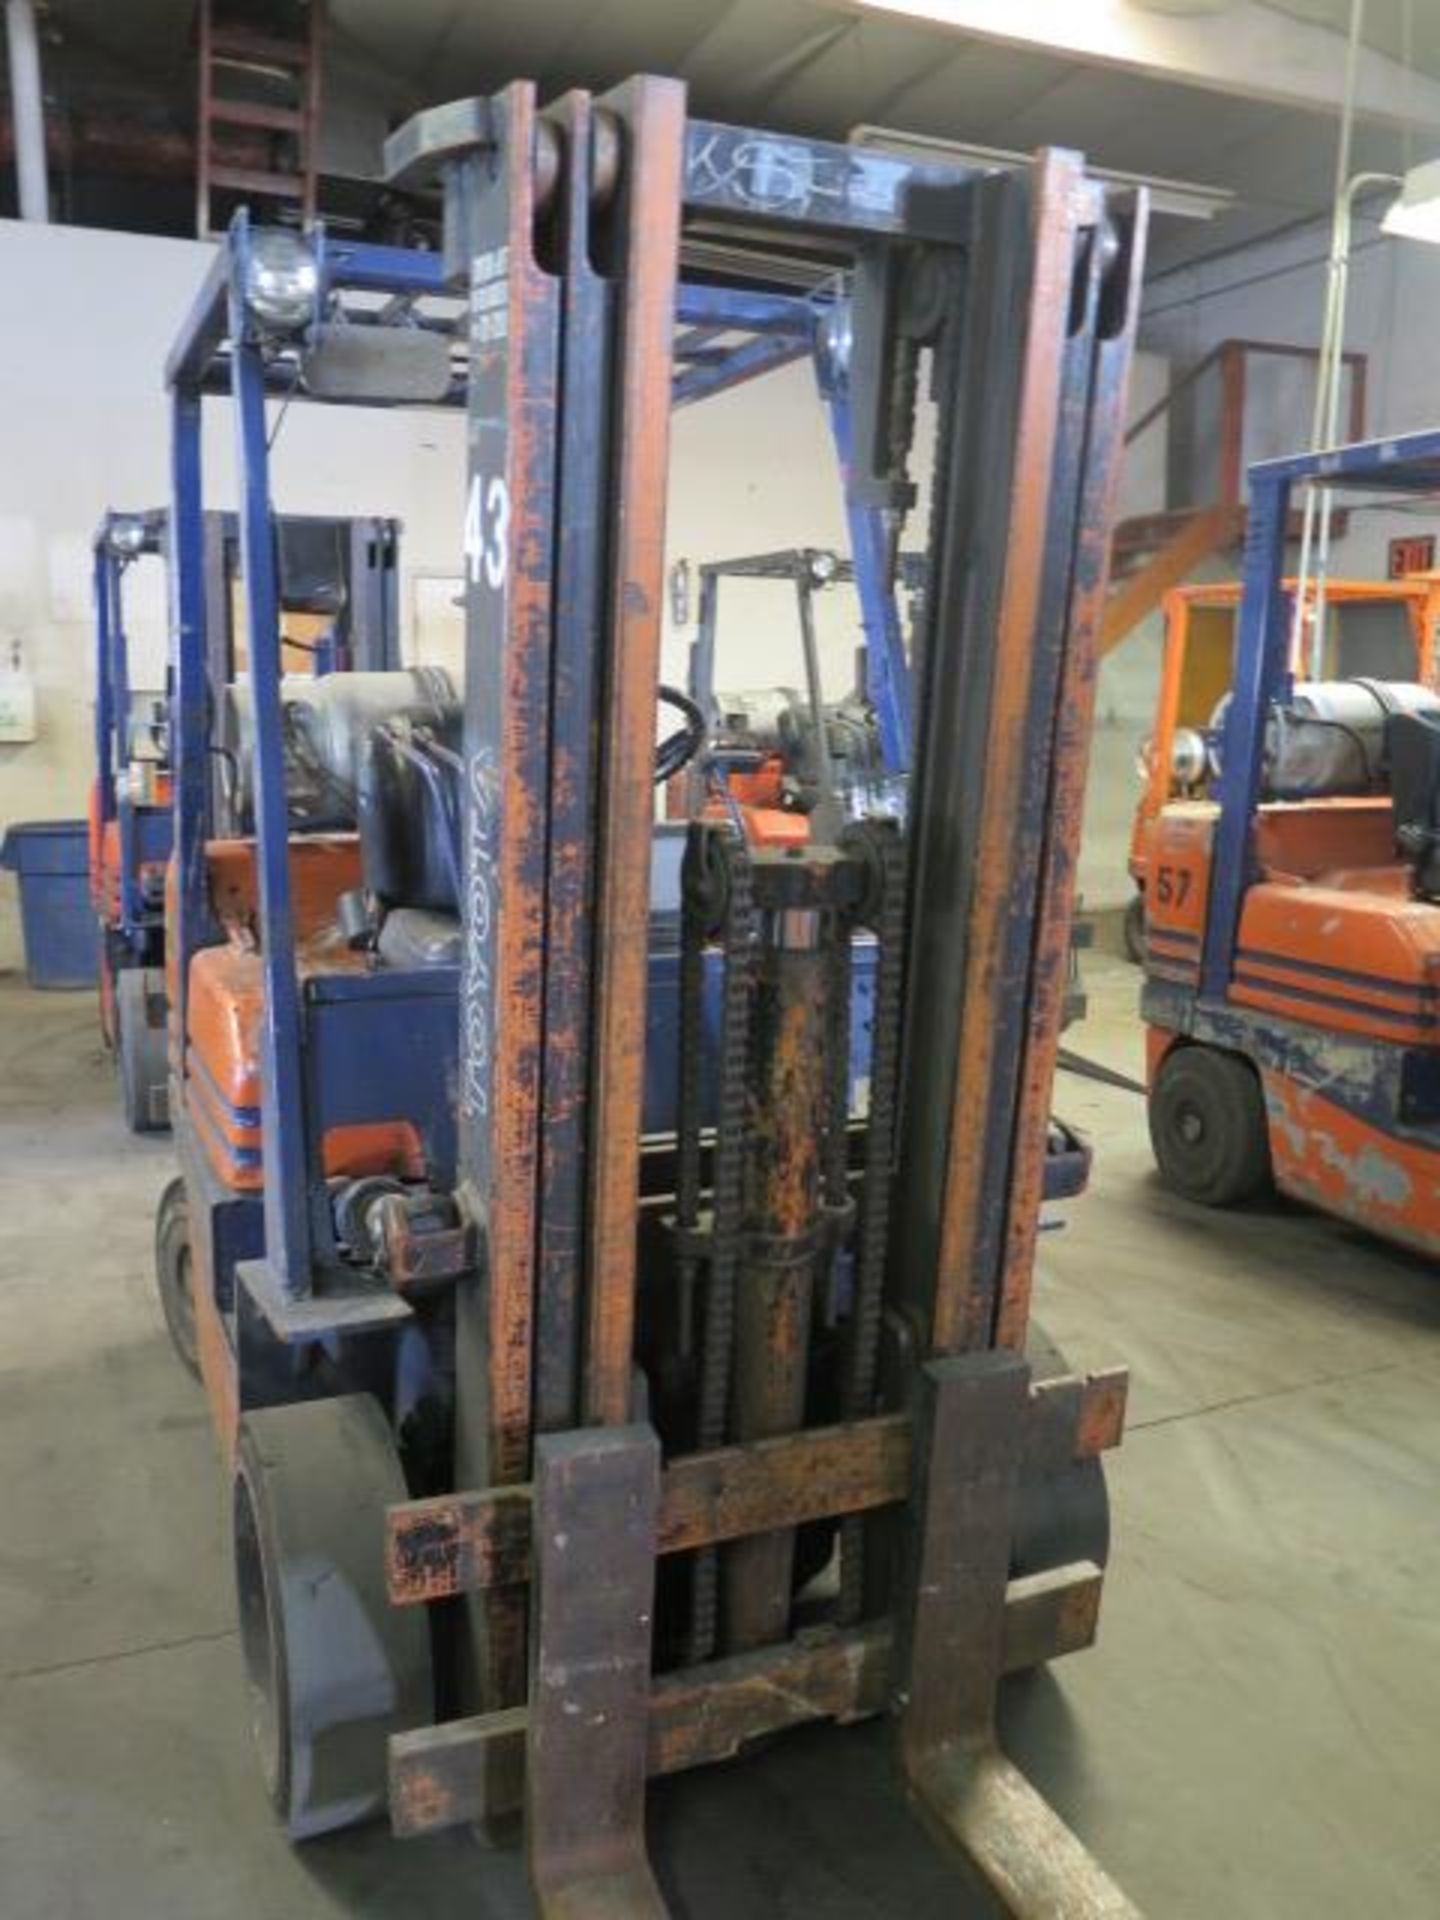 Toyota 5FGC25 5000 Lb Cap LPG Forklift s/n 18534 w/ 3-Stage Mast, 185” Lift Height, Cushion Tires - Image 5 of 10